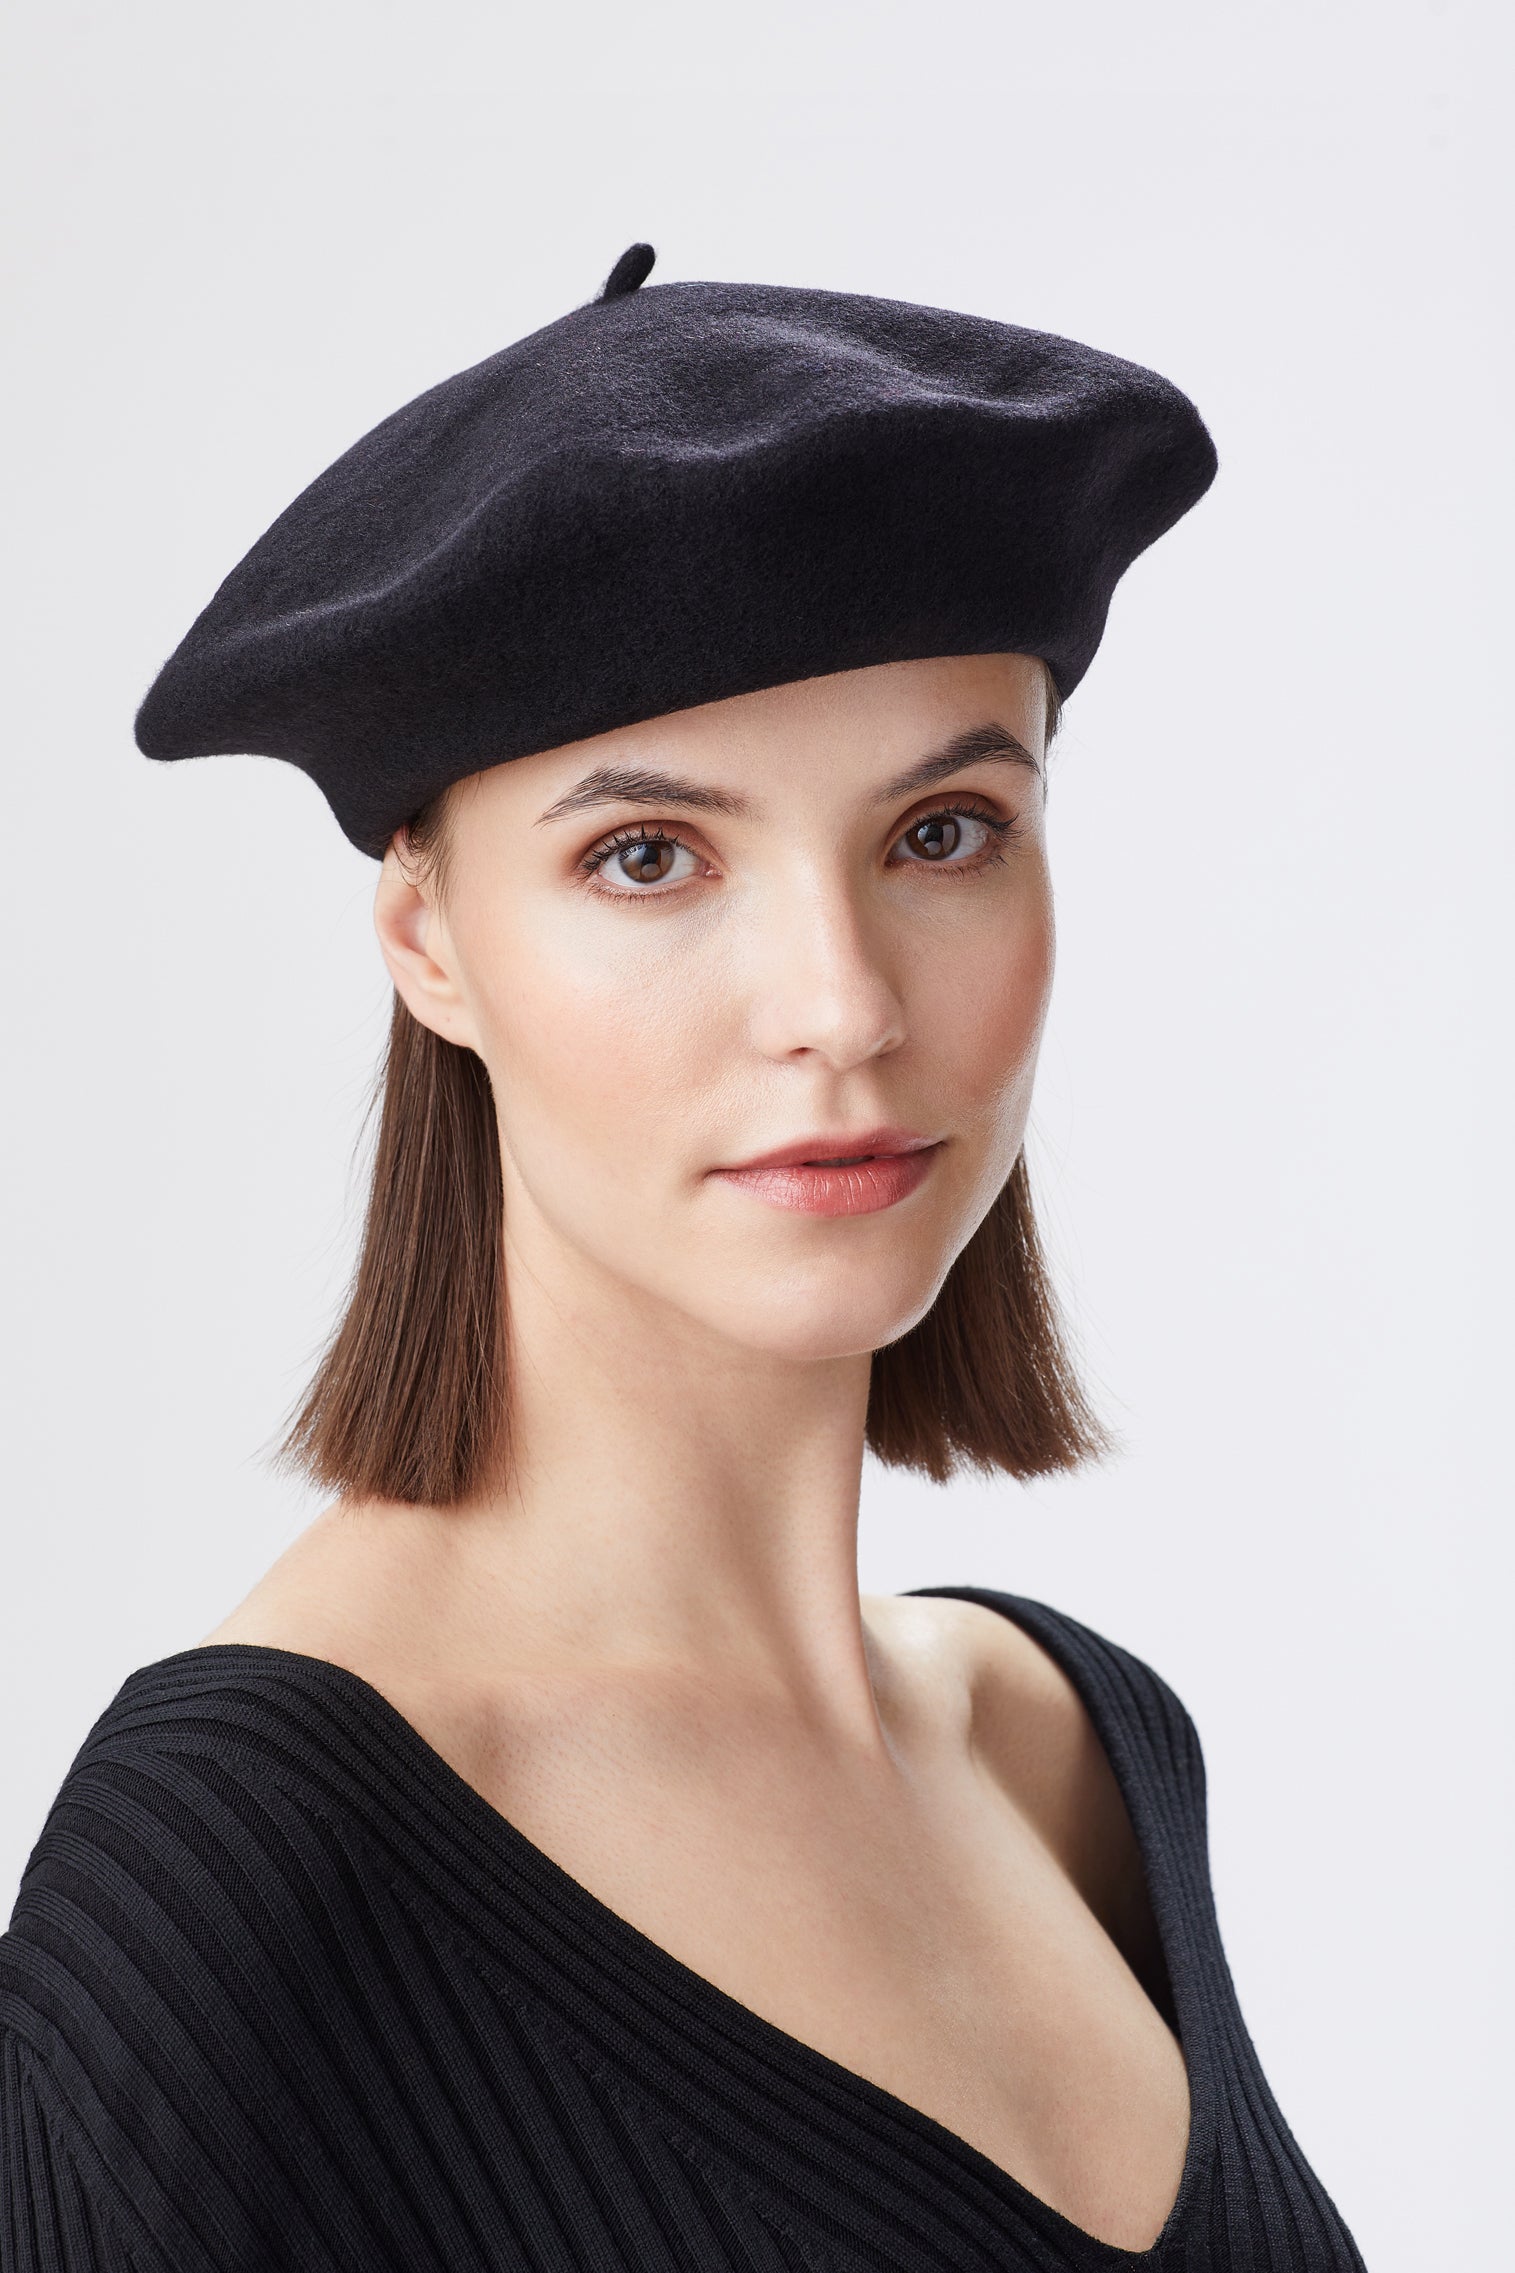 French Beret - Hats for Oval Face Shapes - Lock & Co. Hatters London UK